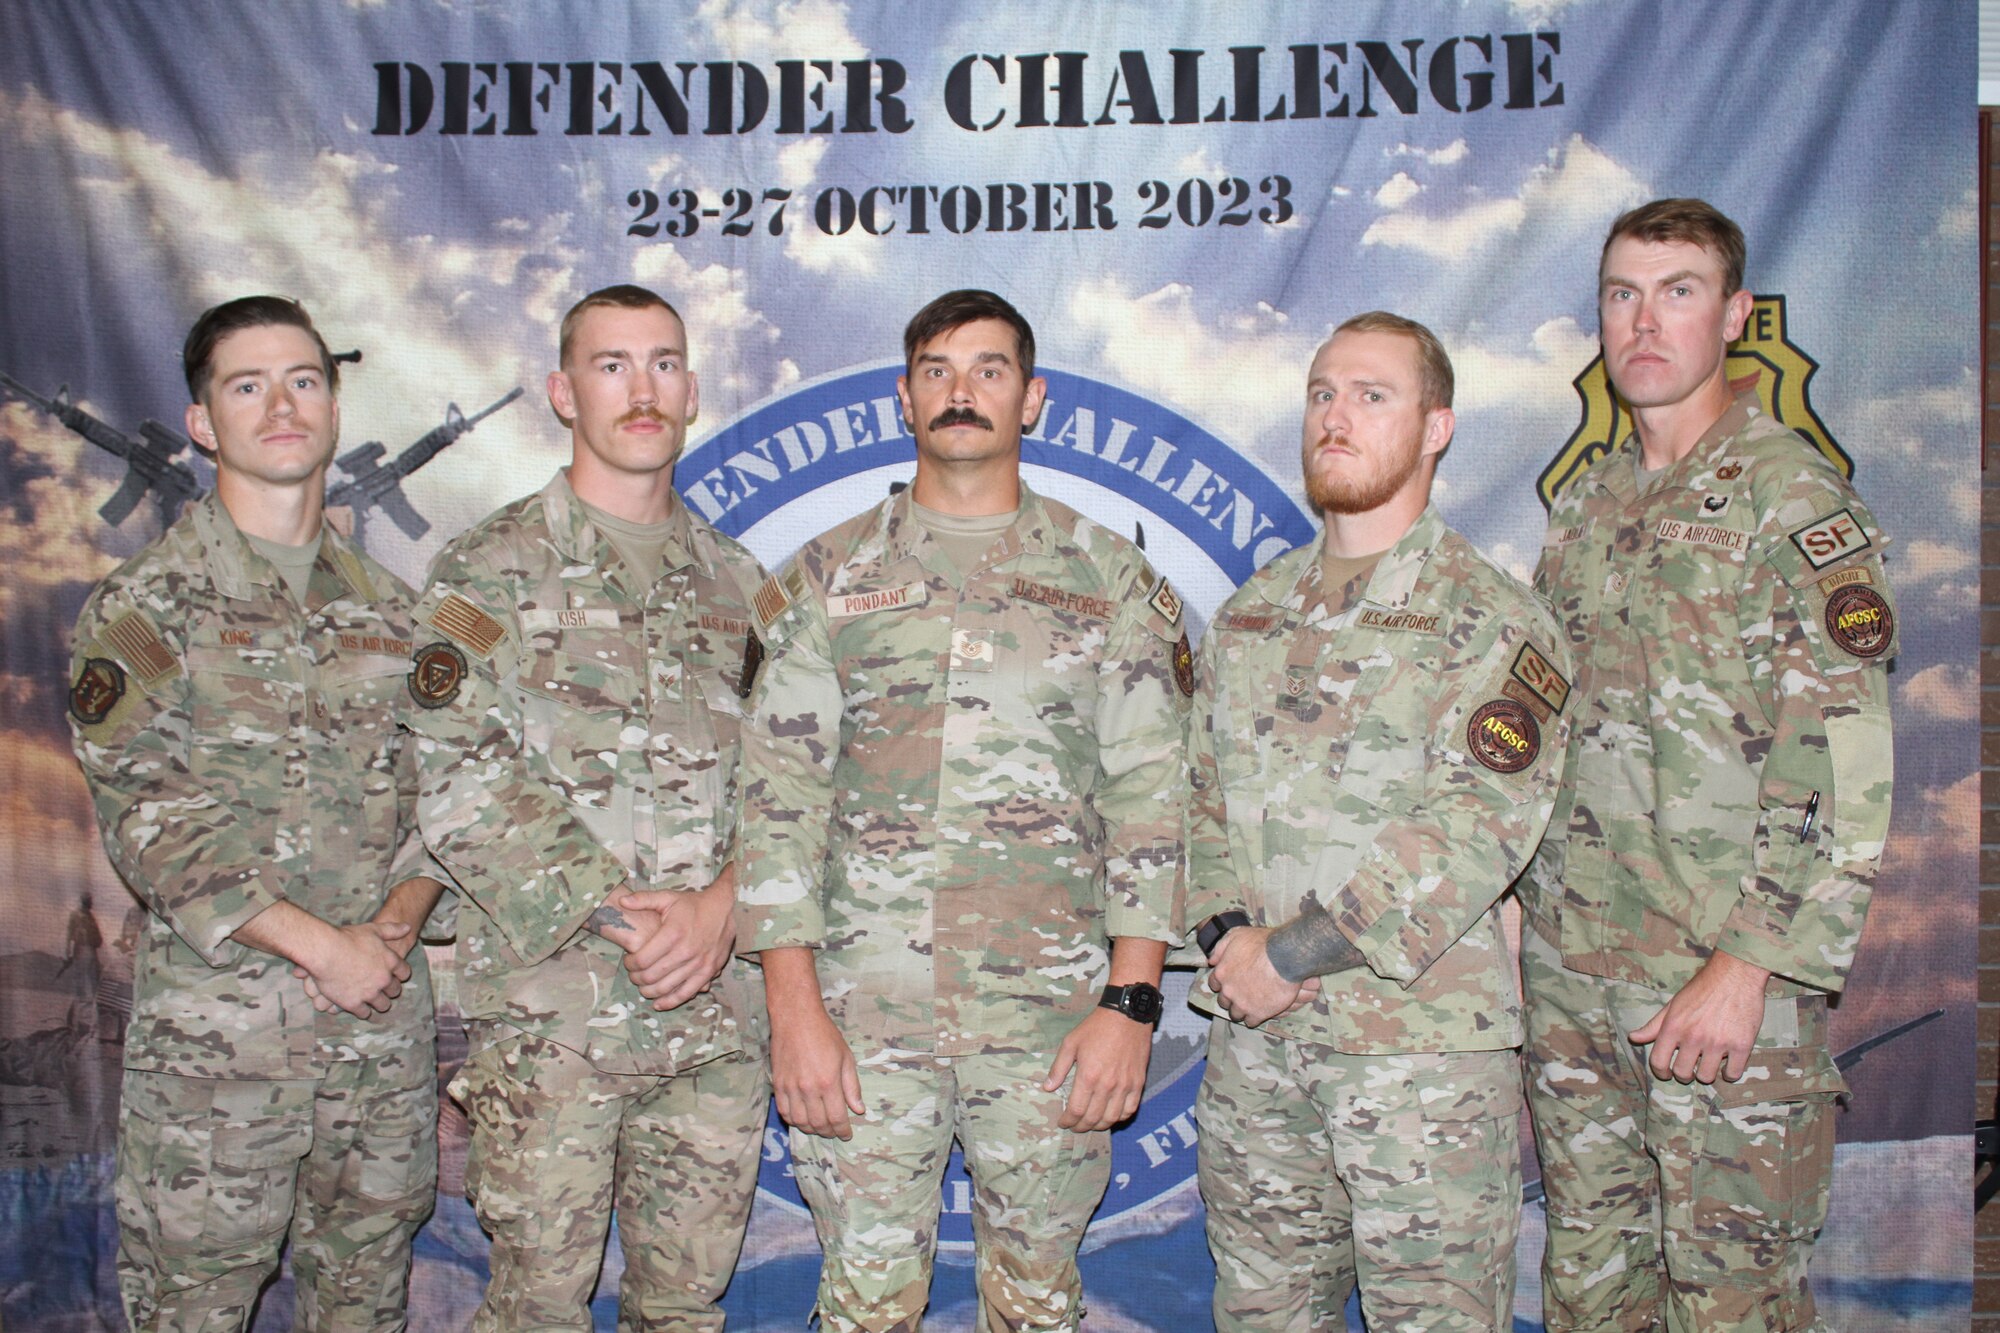 group photo of defenders in front of a banner reading Defender Challenge 23-27 October